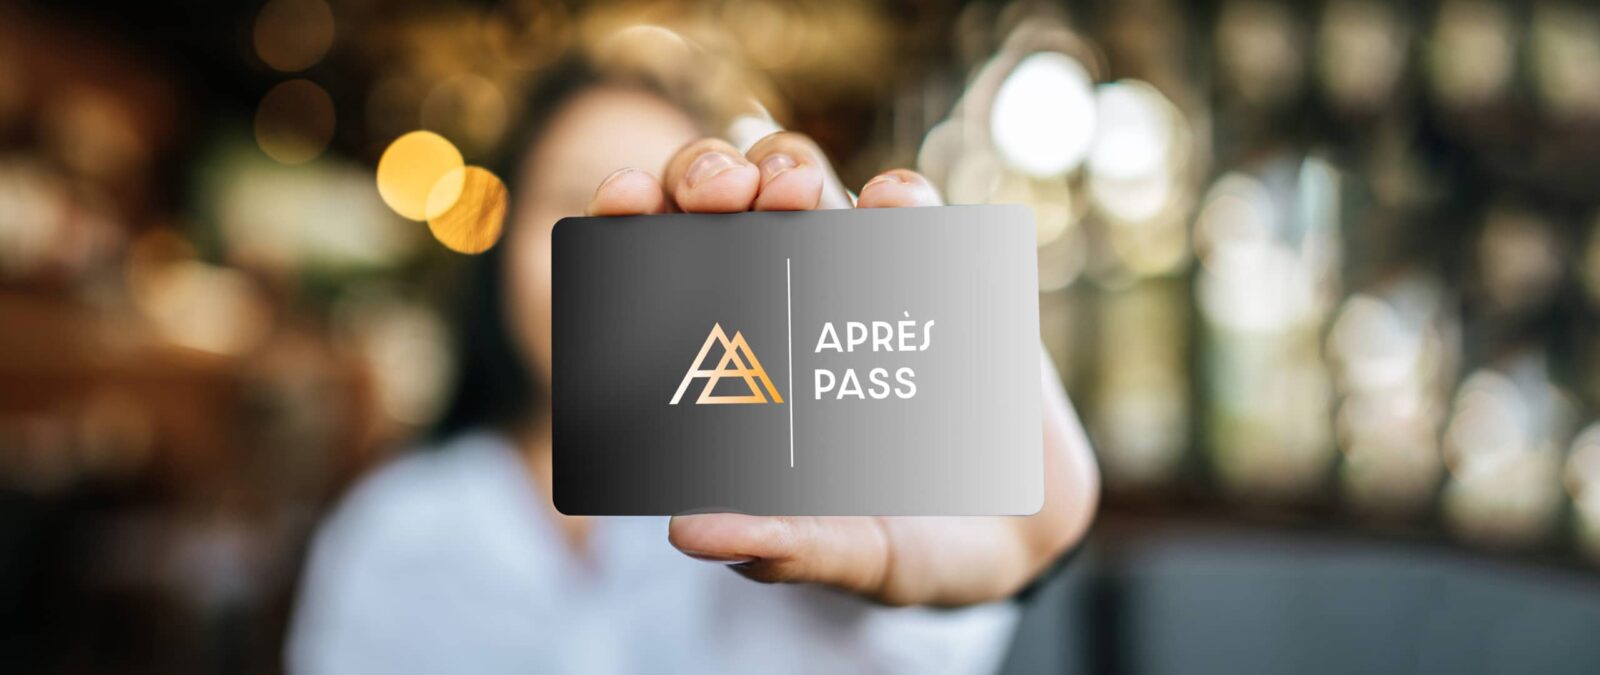 Experience Whistler with the Après Pass